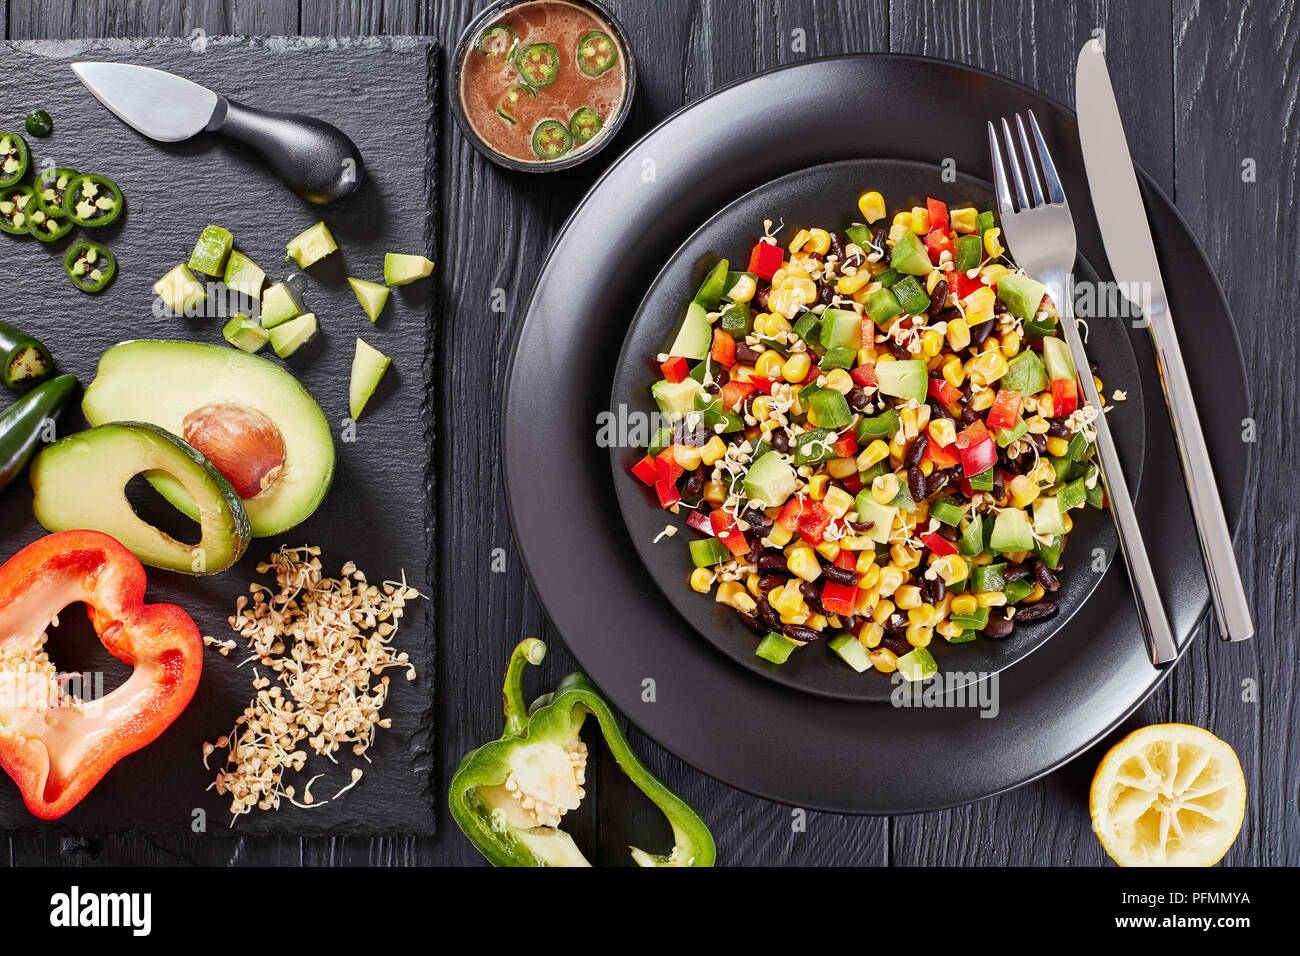 mexican style salad with avocado, black beans, corn kernels, buckwheat sprouts, diced pepper served on black plates with ingredients on stone board an Stock Photo